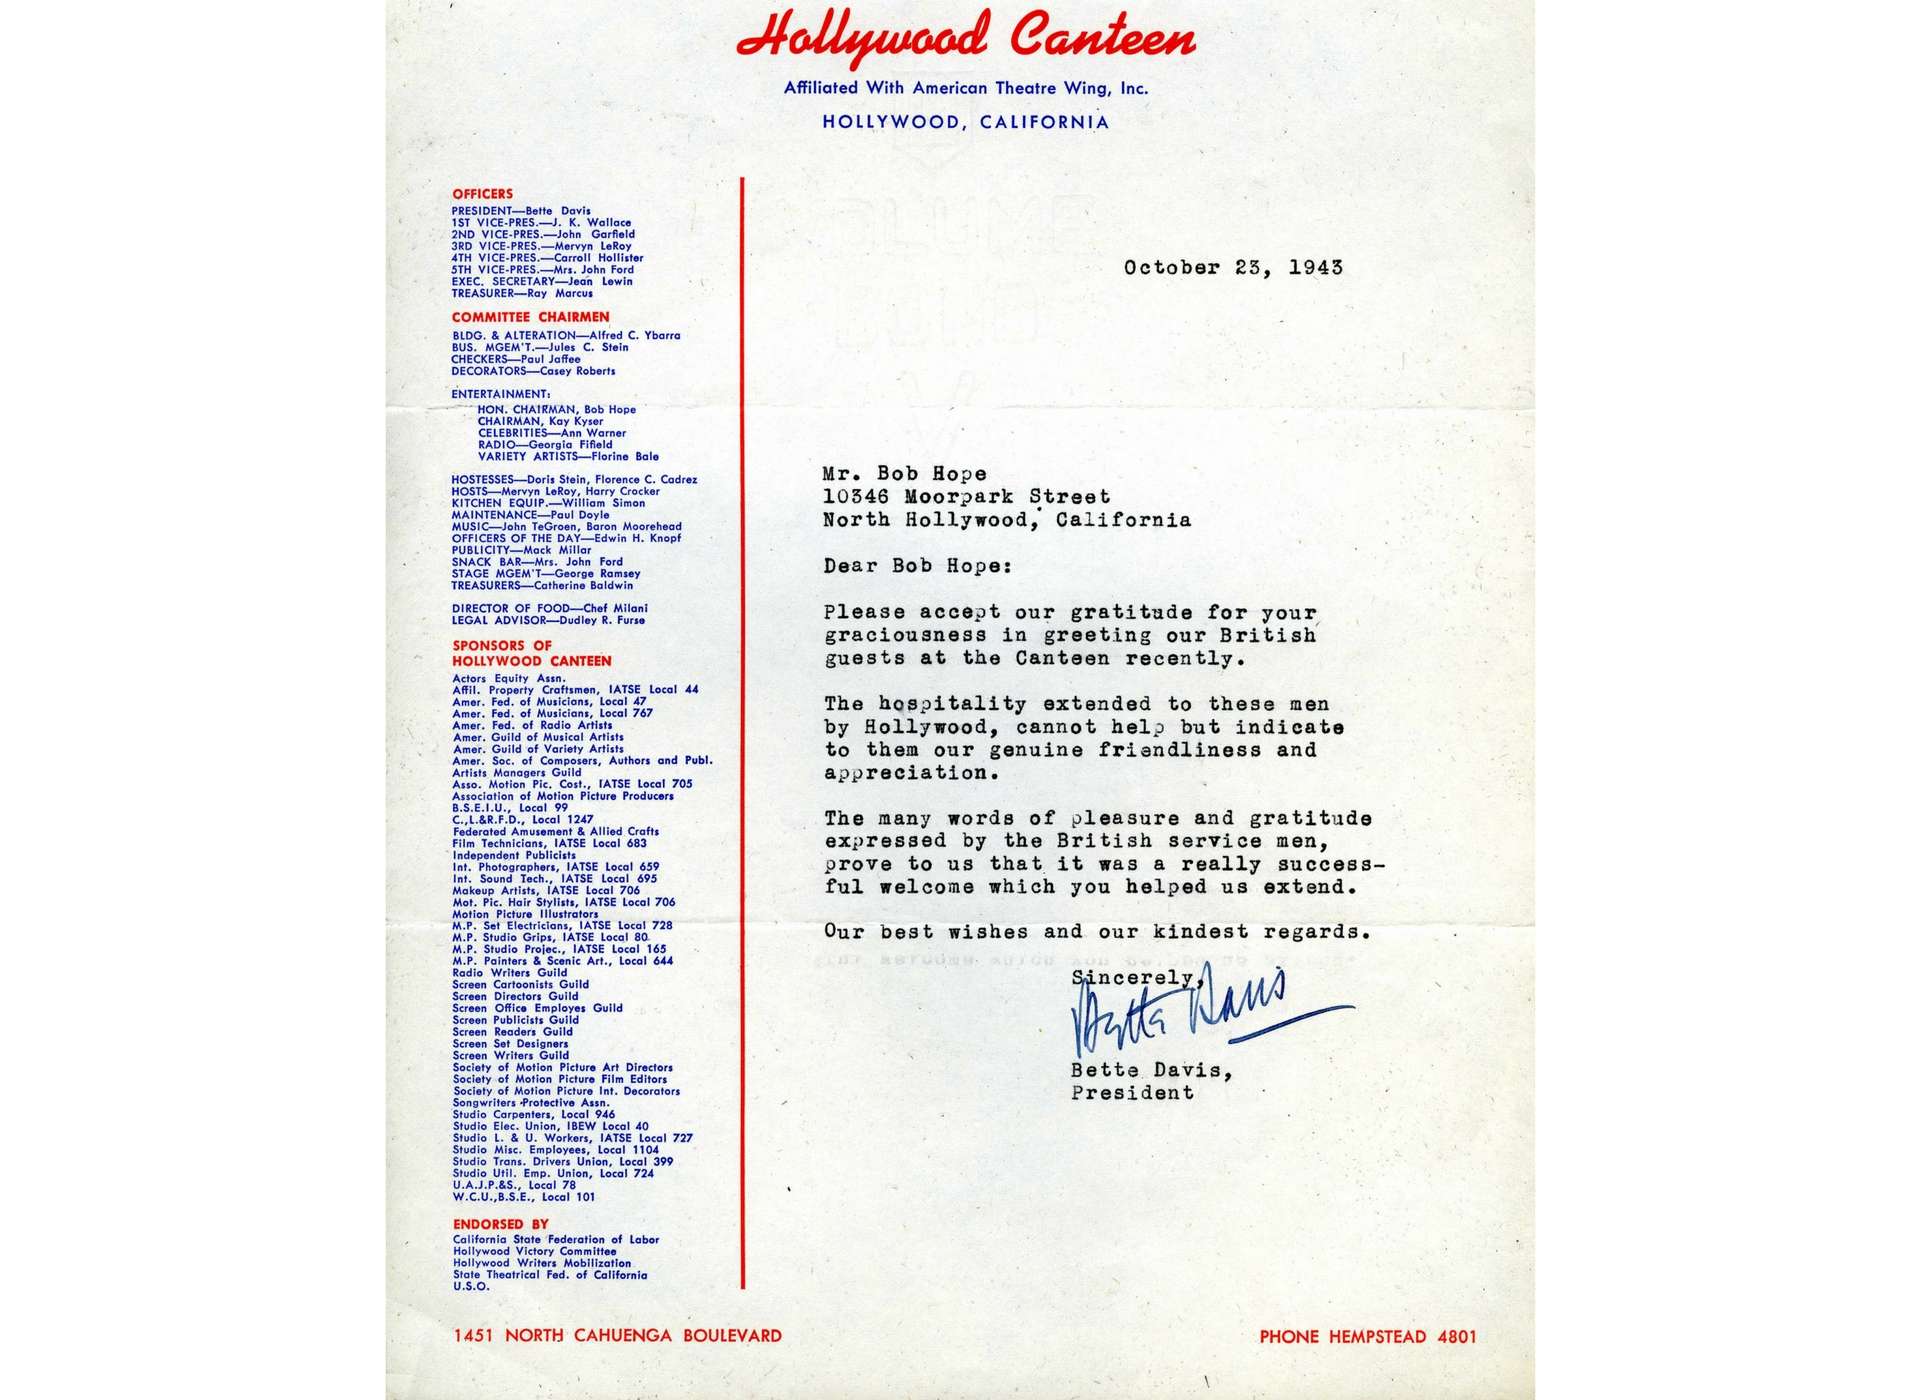 Canteen letter